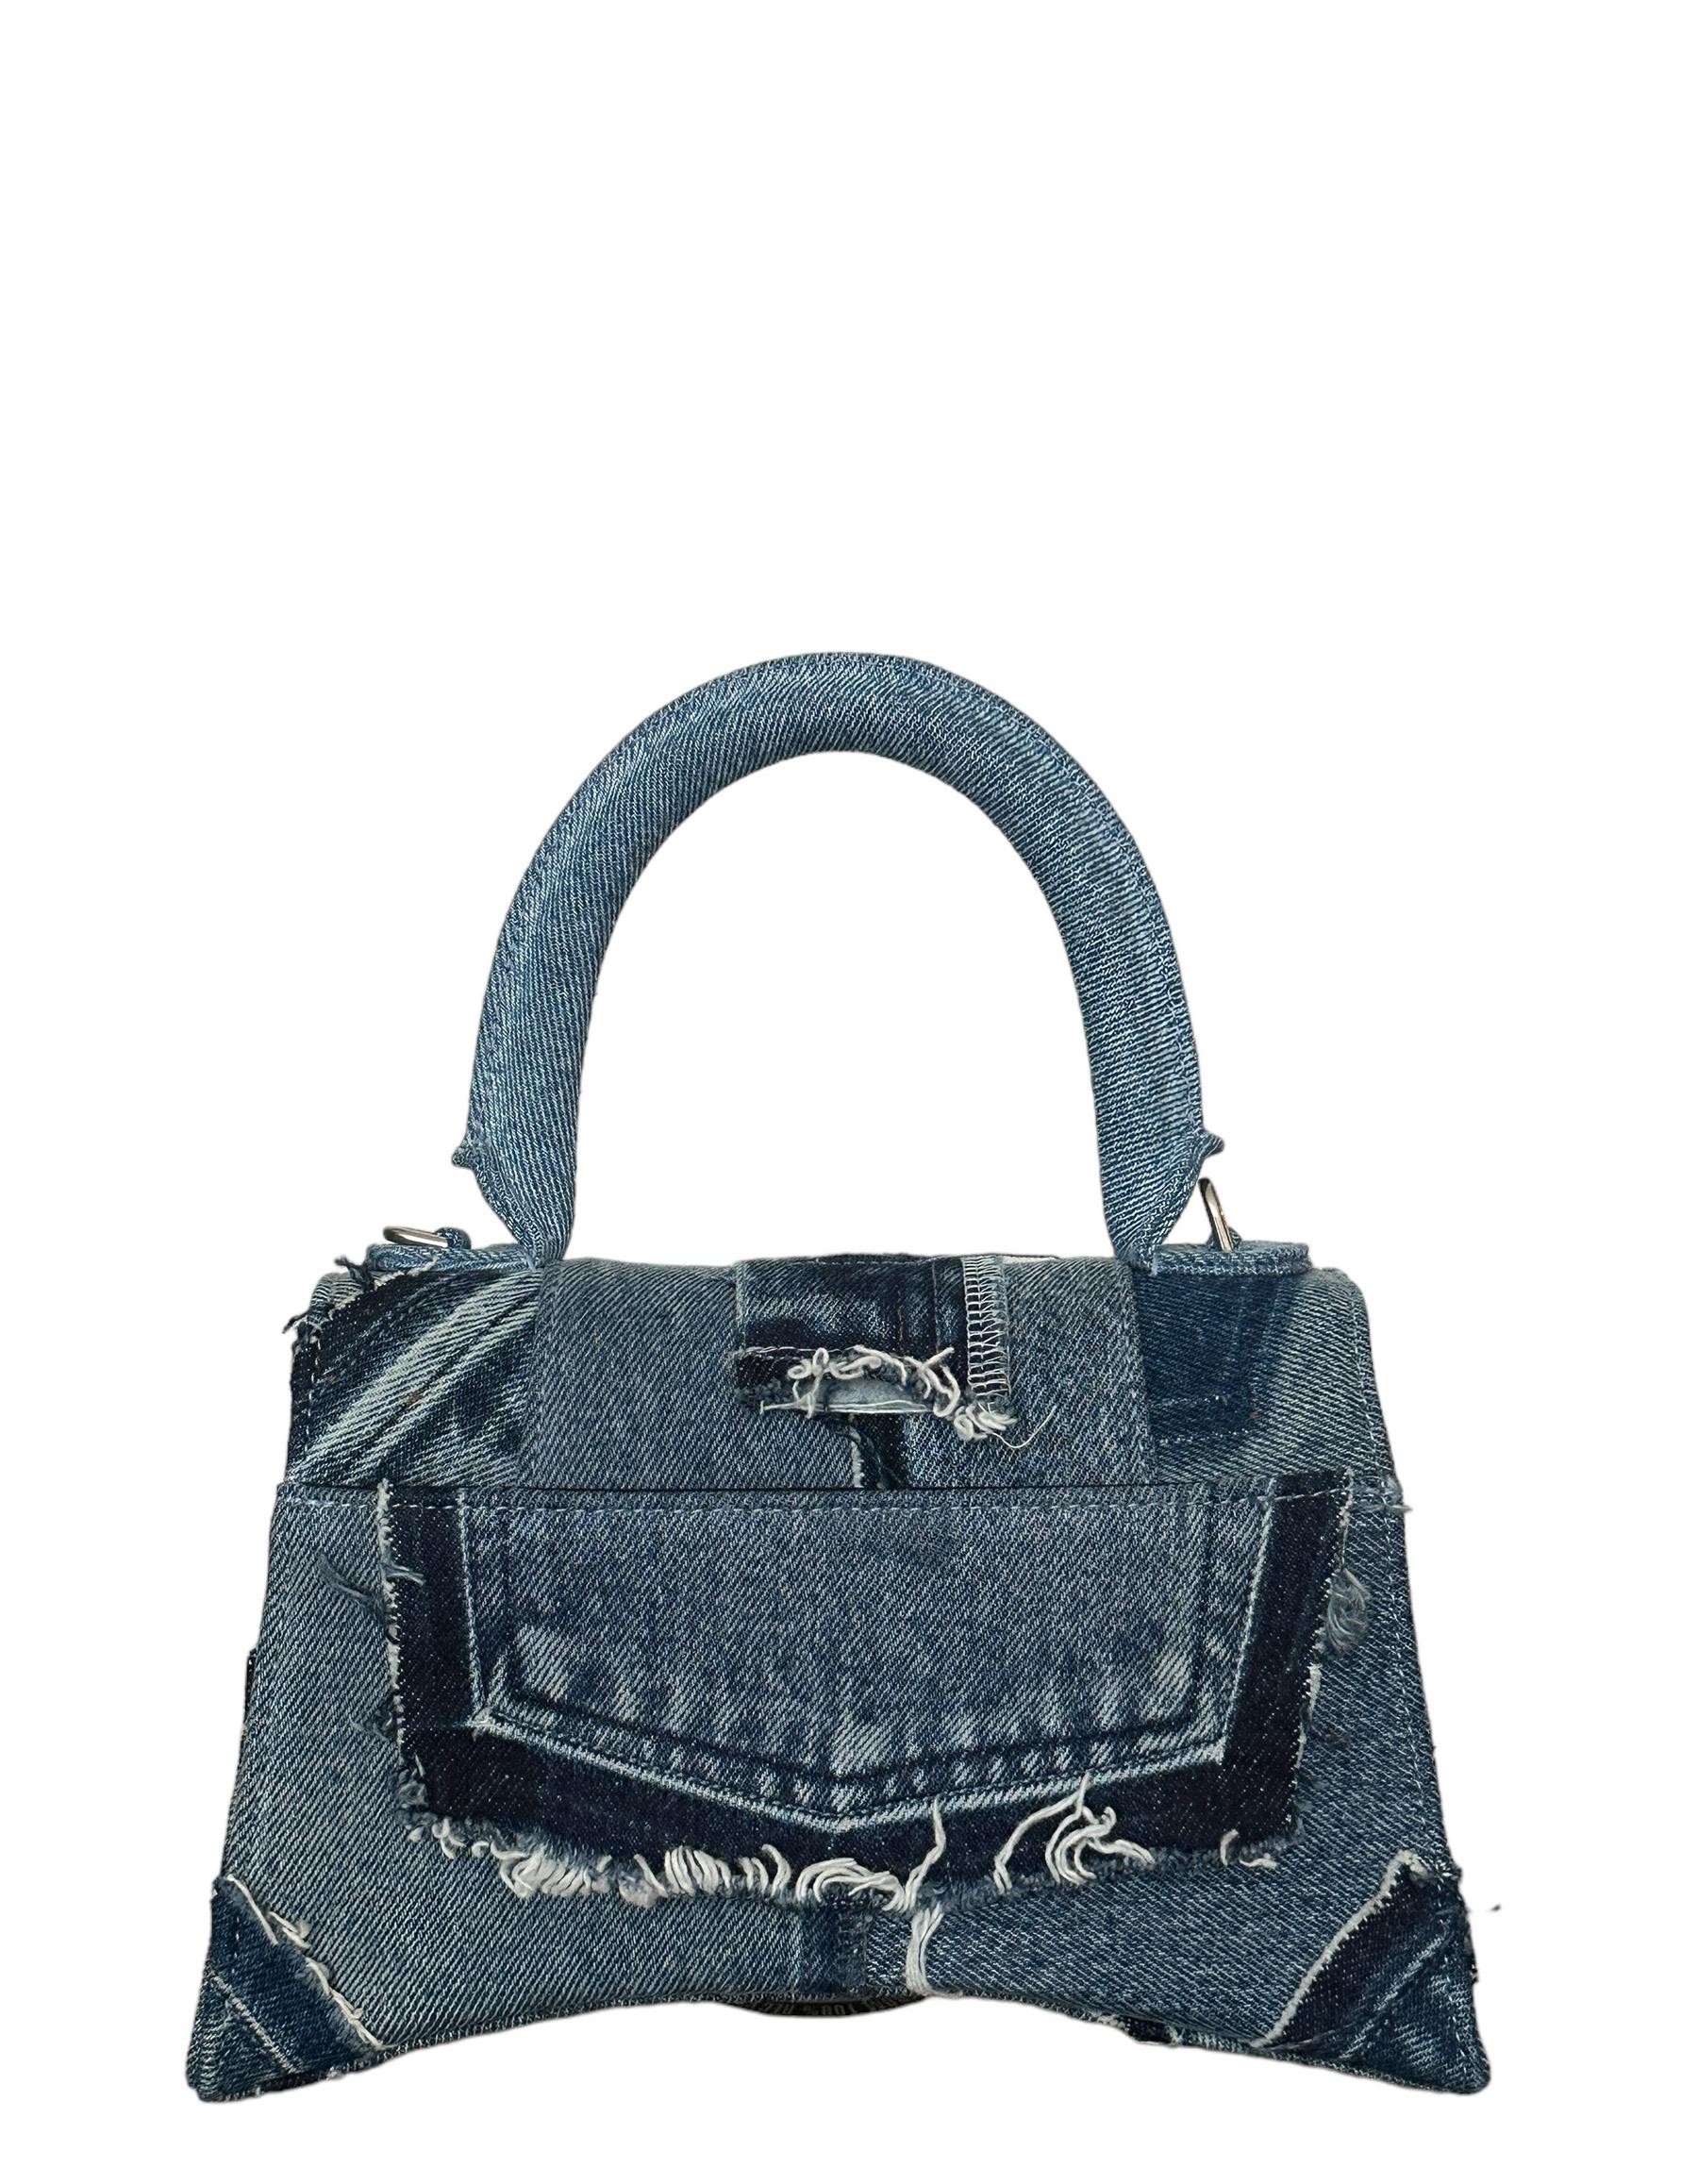 Balenciaga Blue Denim Patchwork Small Hourglass Top Handle Bag

Made In: Italy
Color: Blue
Hardware: Aged silvertone
Materials: Denim
Lining: Black textile
Closure/Opening: Flap top with magnetic closure
Exterior Pockets: Back slit pocket
Interior